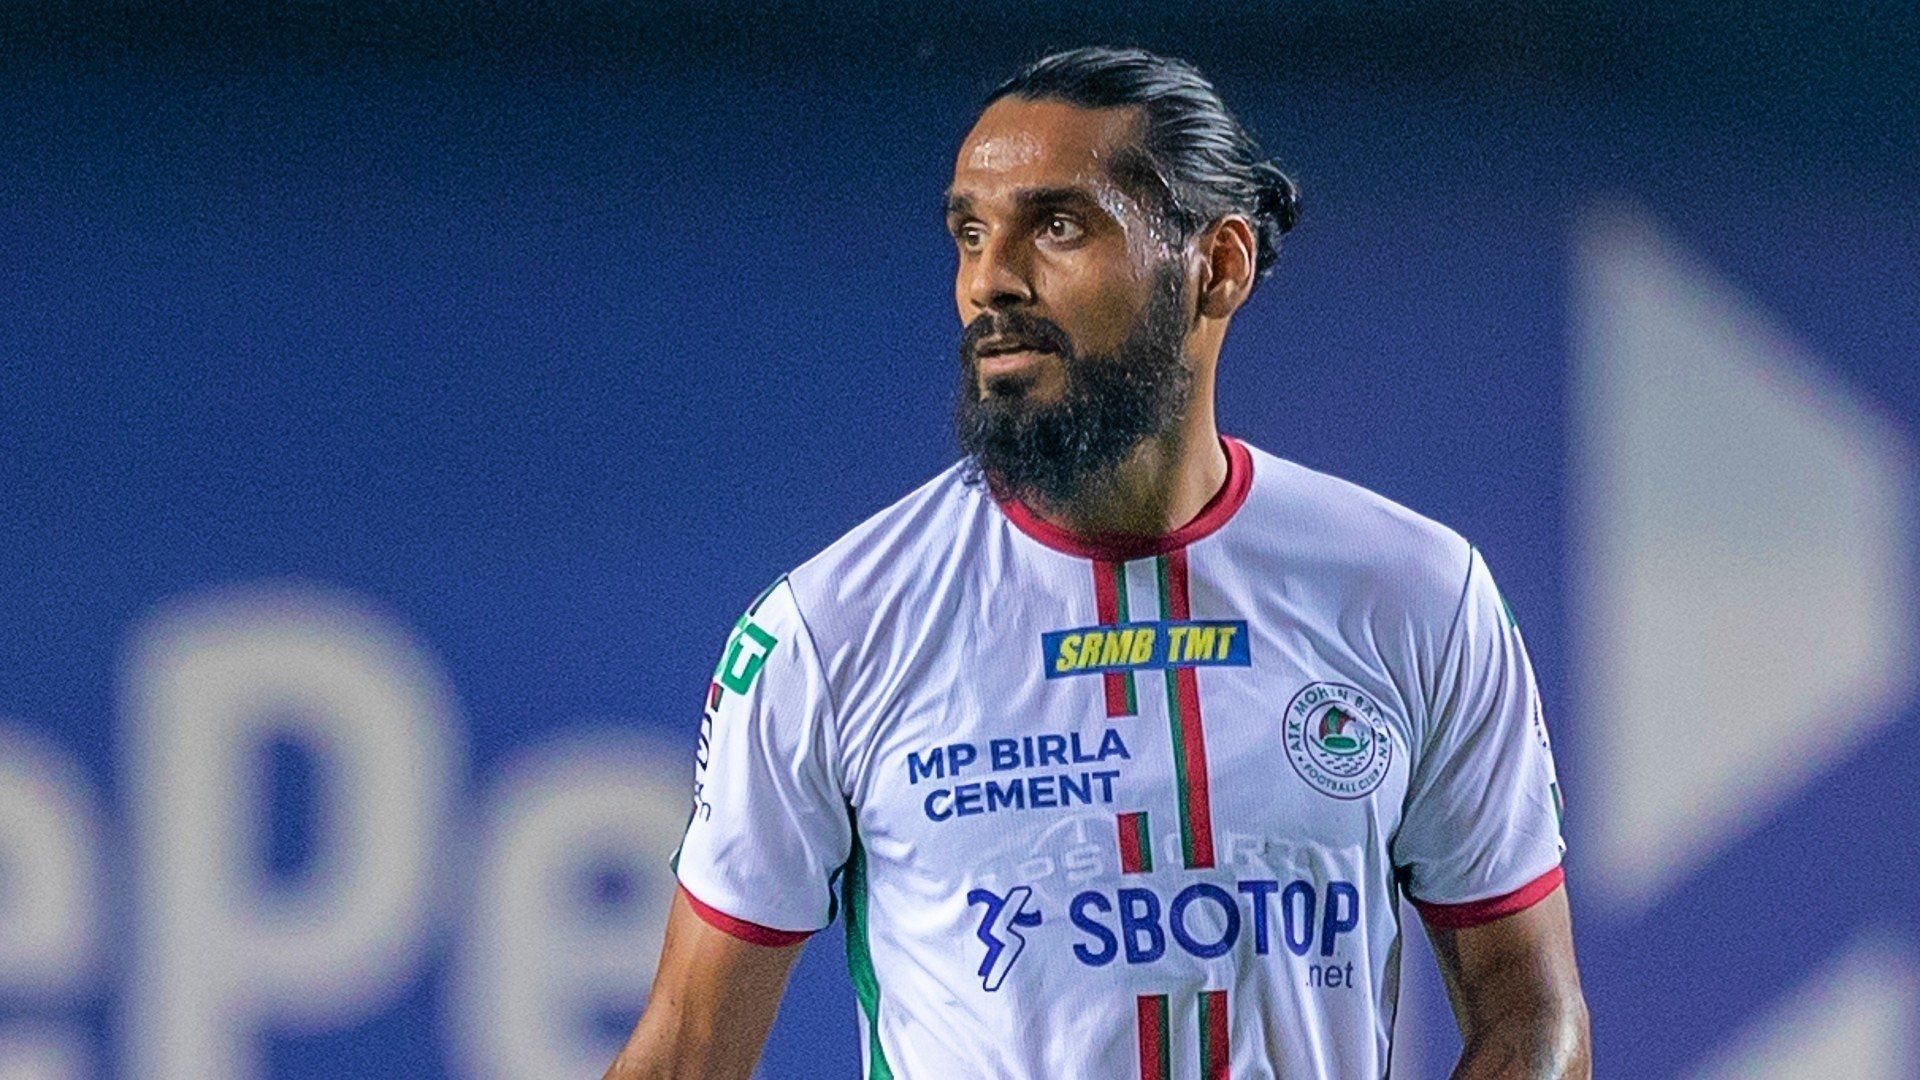 Sandesh Jhingan has joined Bengaluru FC in a shock move announced on Sunday. (Image Courtesy: Twitter)